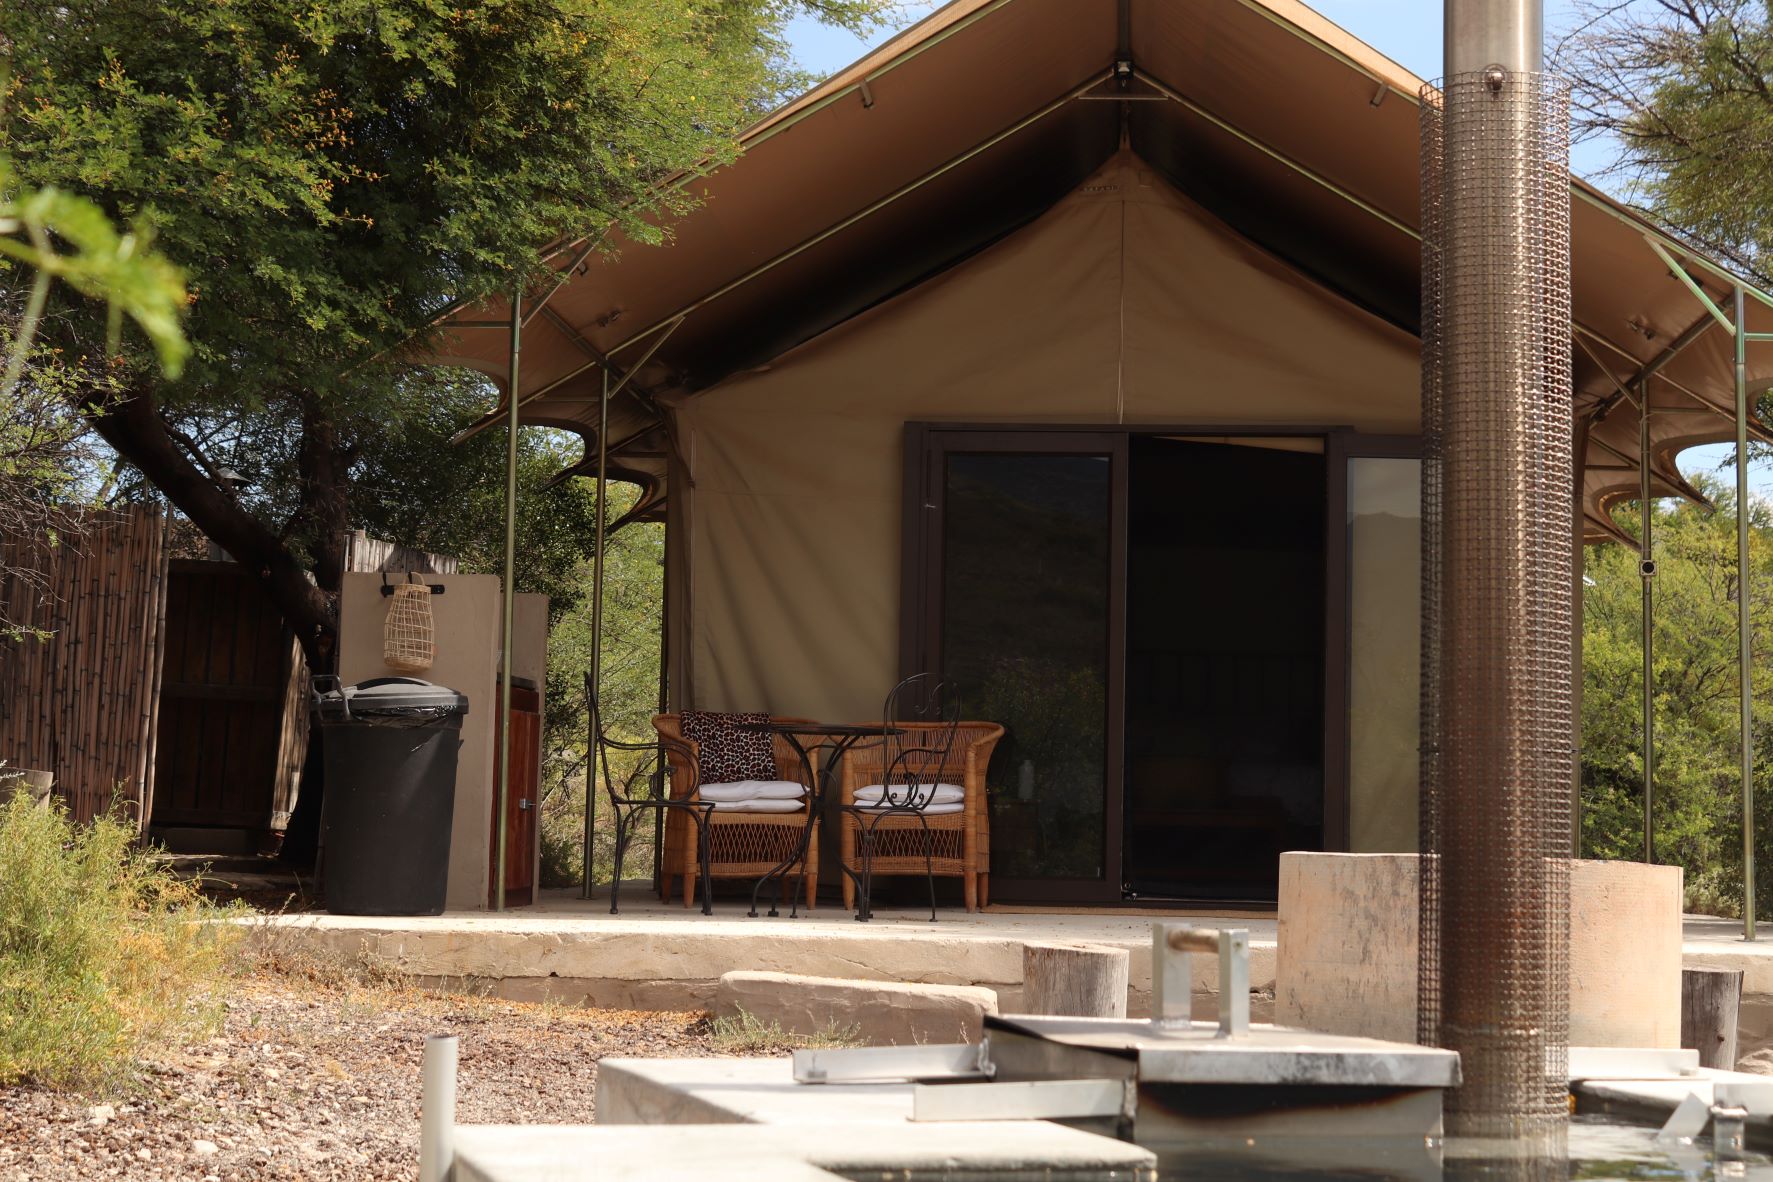 A luxury glamping experience in Montagu